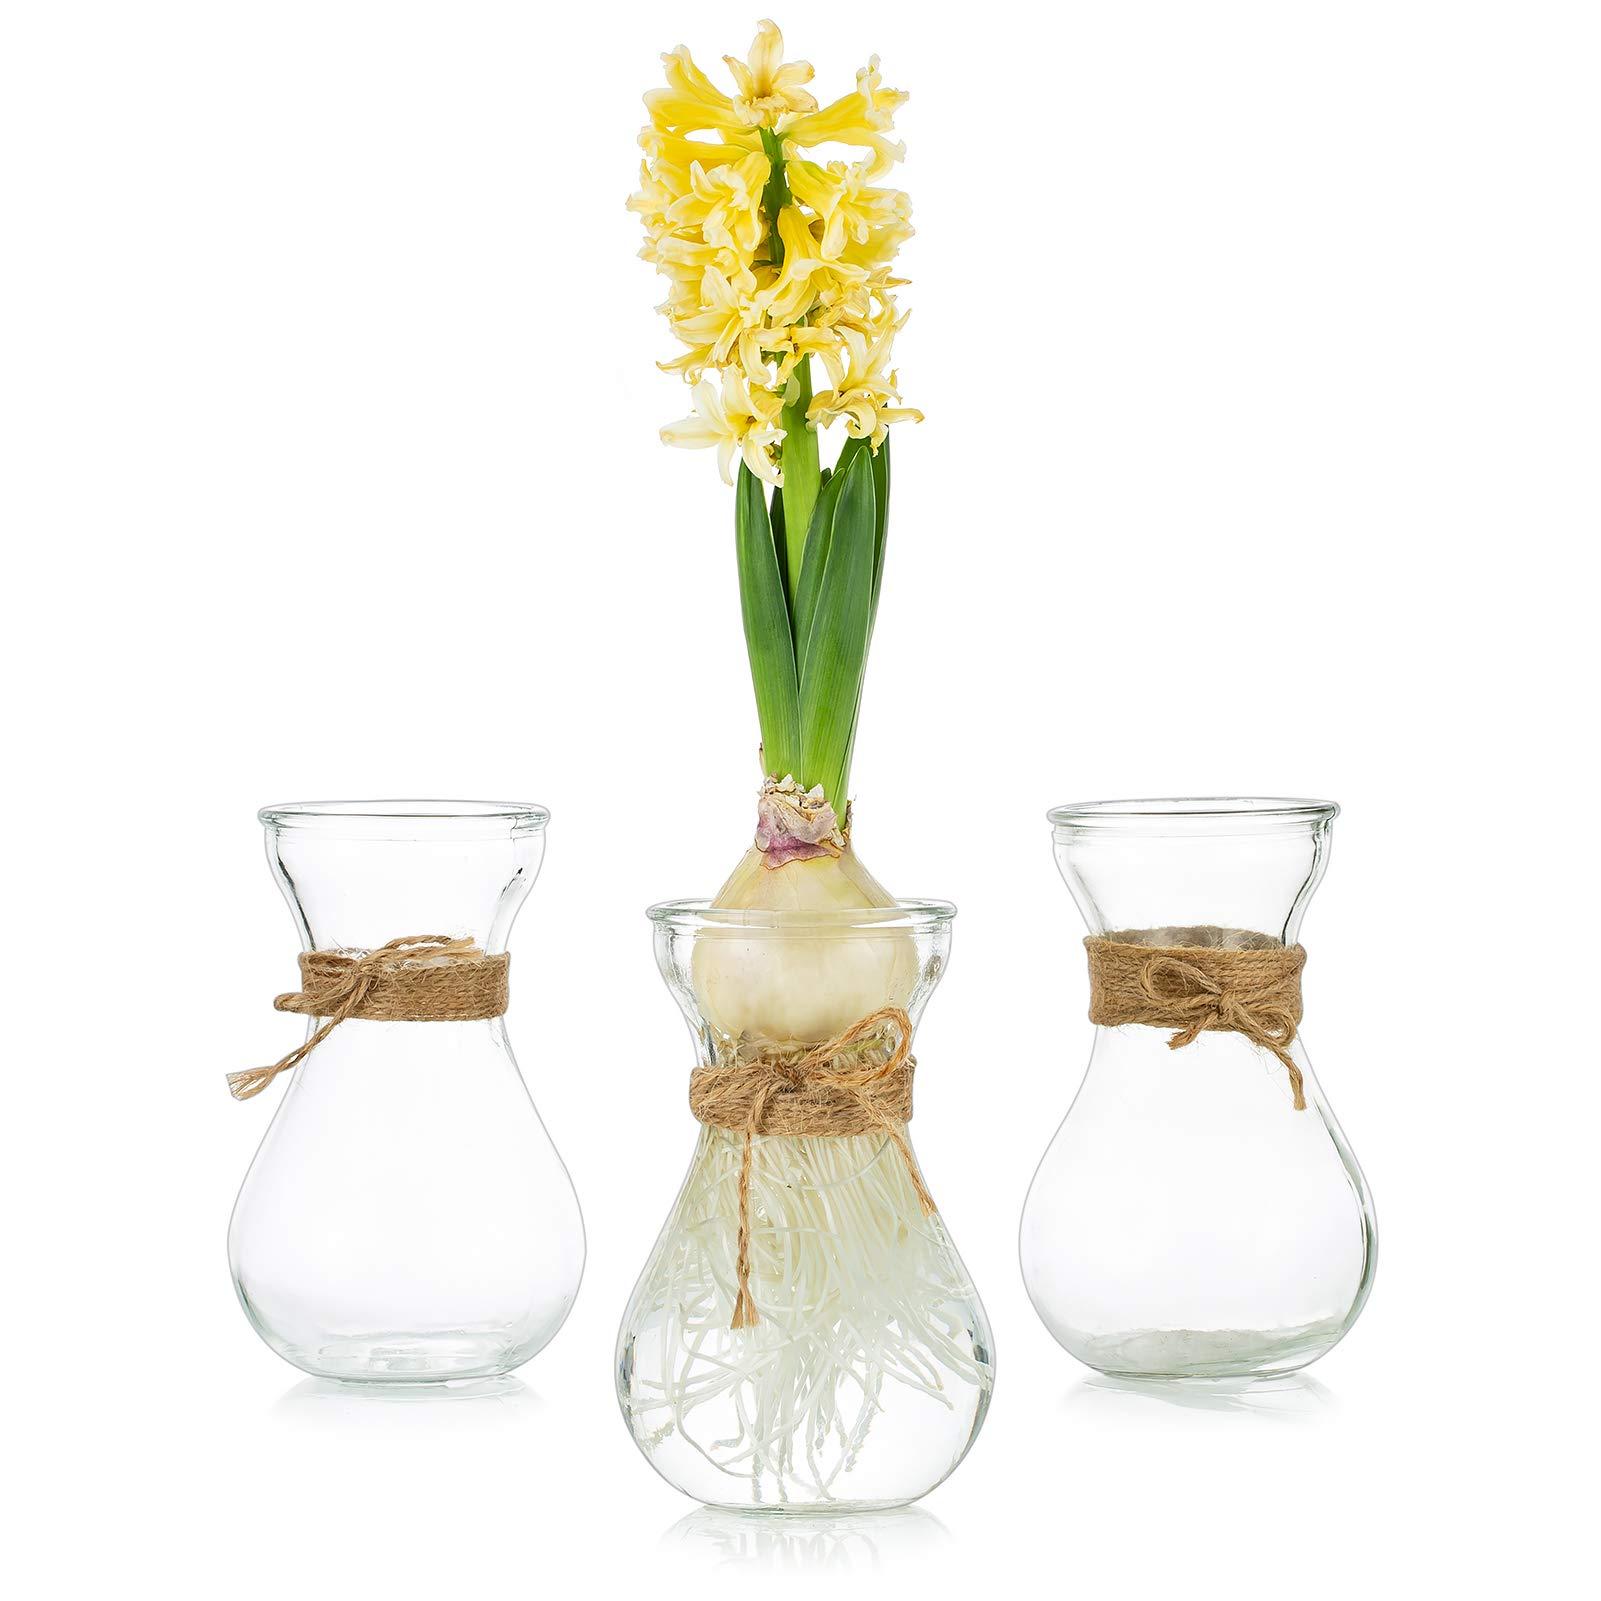 Glass Vases for Flowers with Twine Rope 3 Pcs/Set Floral Arrangements, Flower Vases Glass, Crystal Bud Vases Creative for Wedding, Home, Kitchen, Garden Balcony Decoration